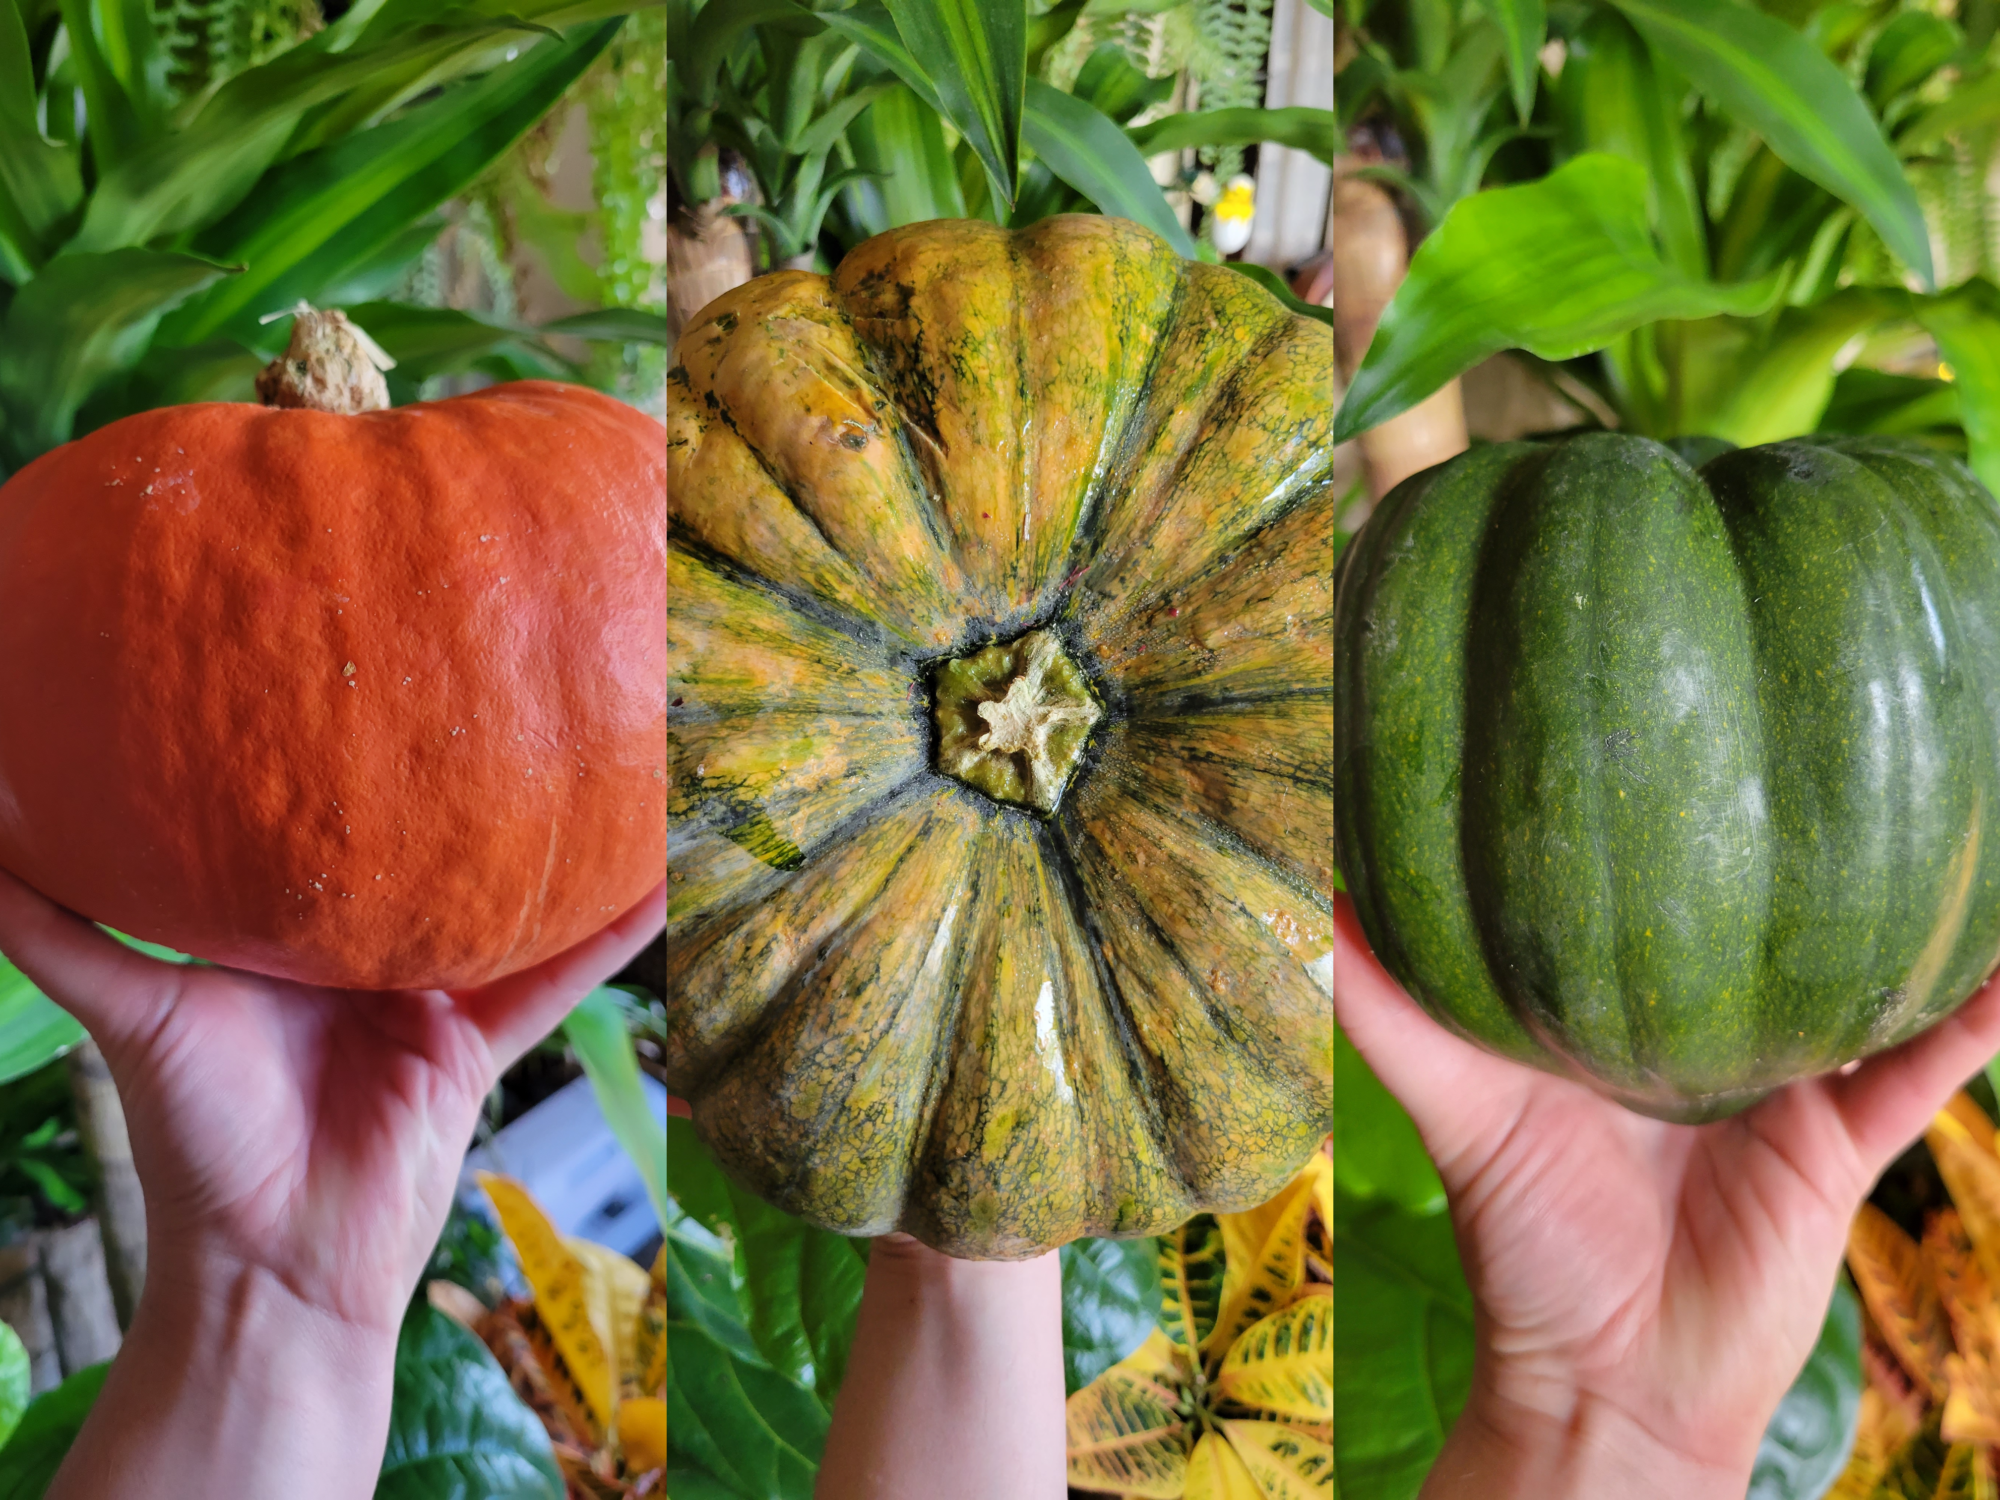 The Fundamentals of Roasting Pumpkins, Squash, & Other Gourds